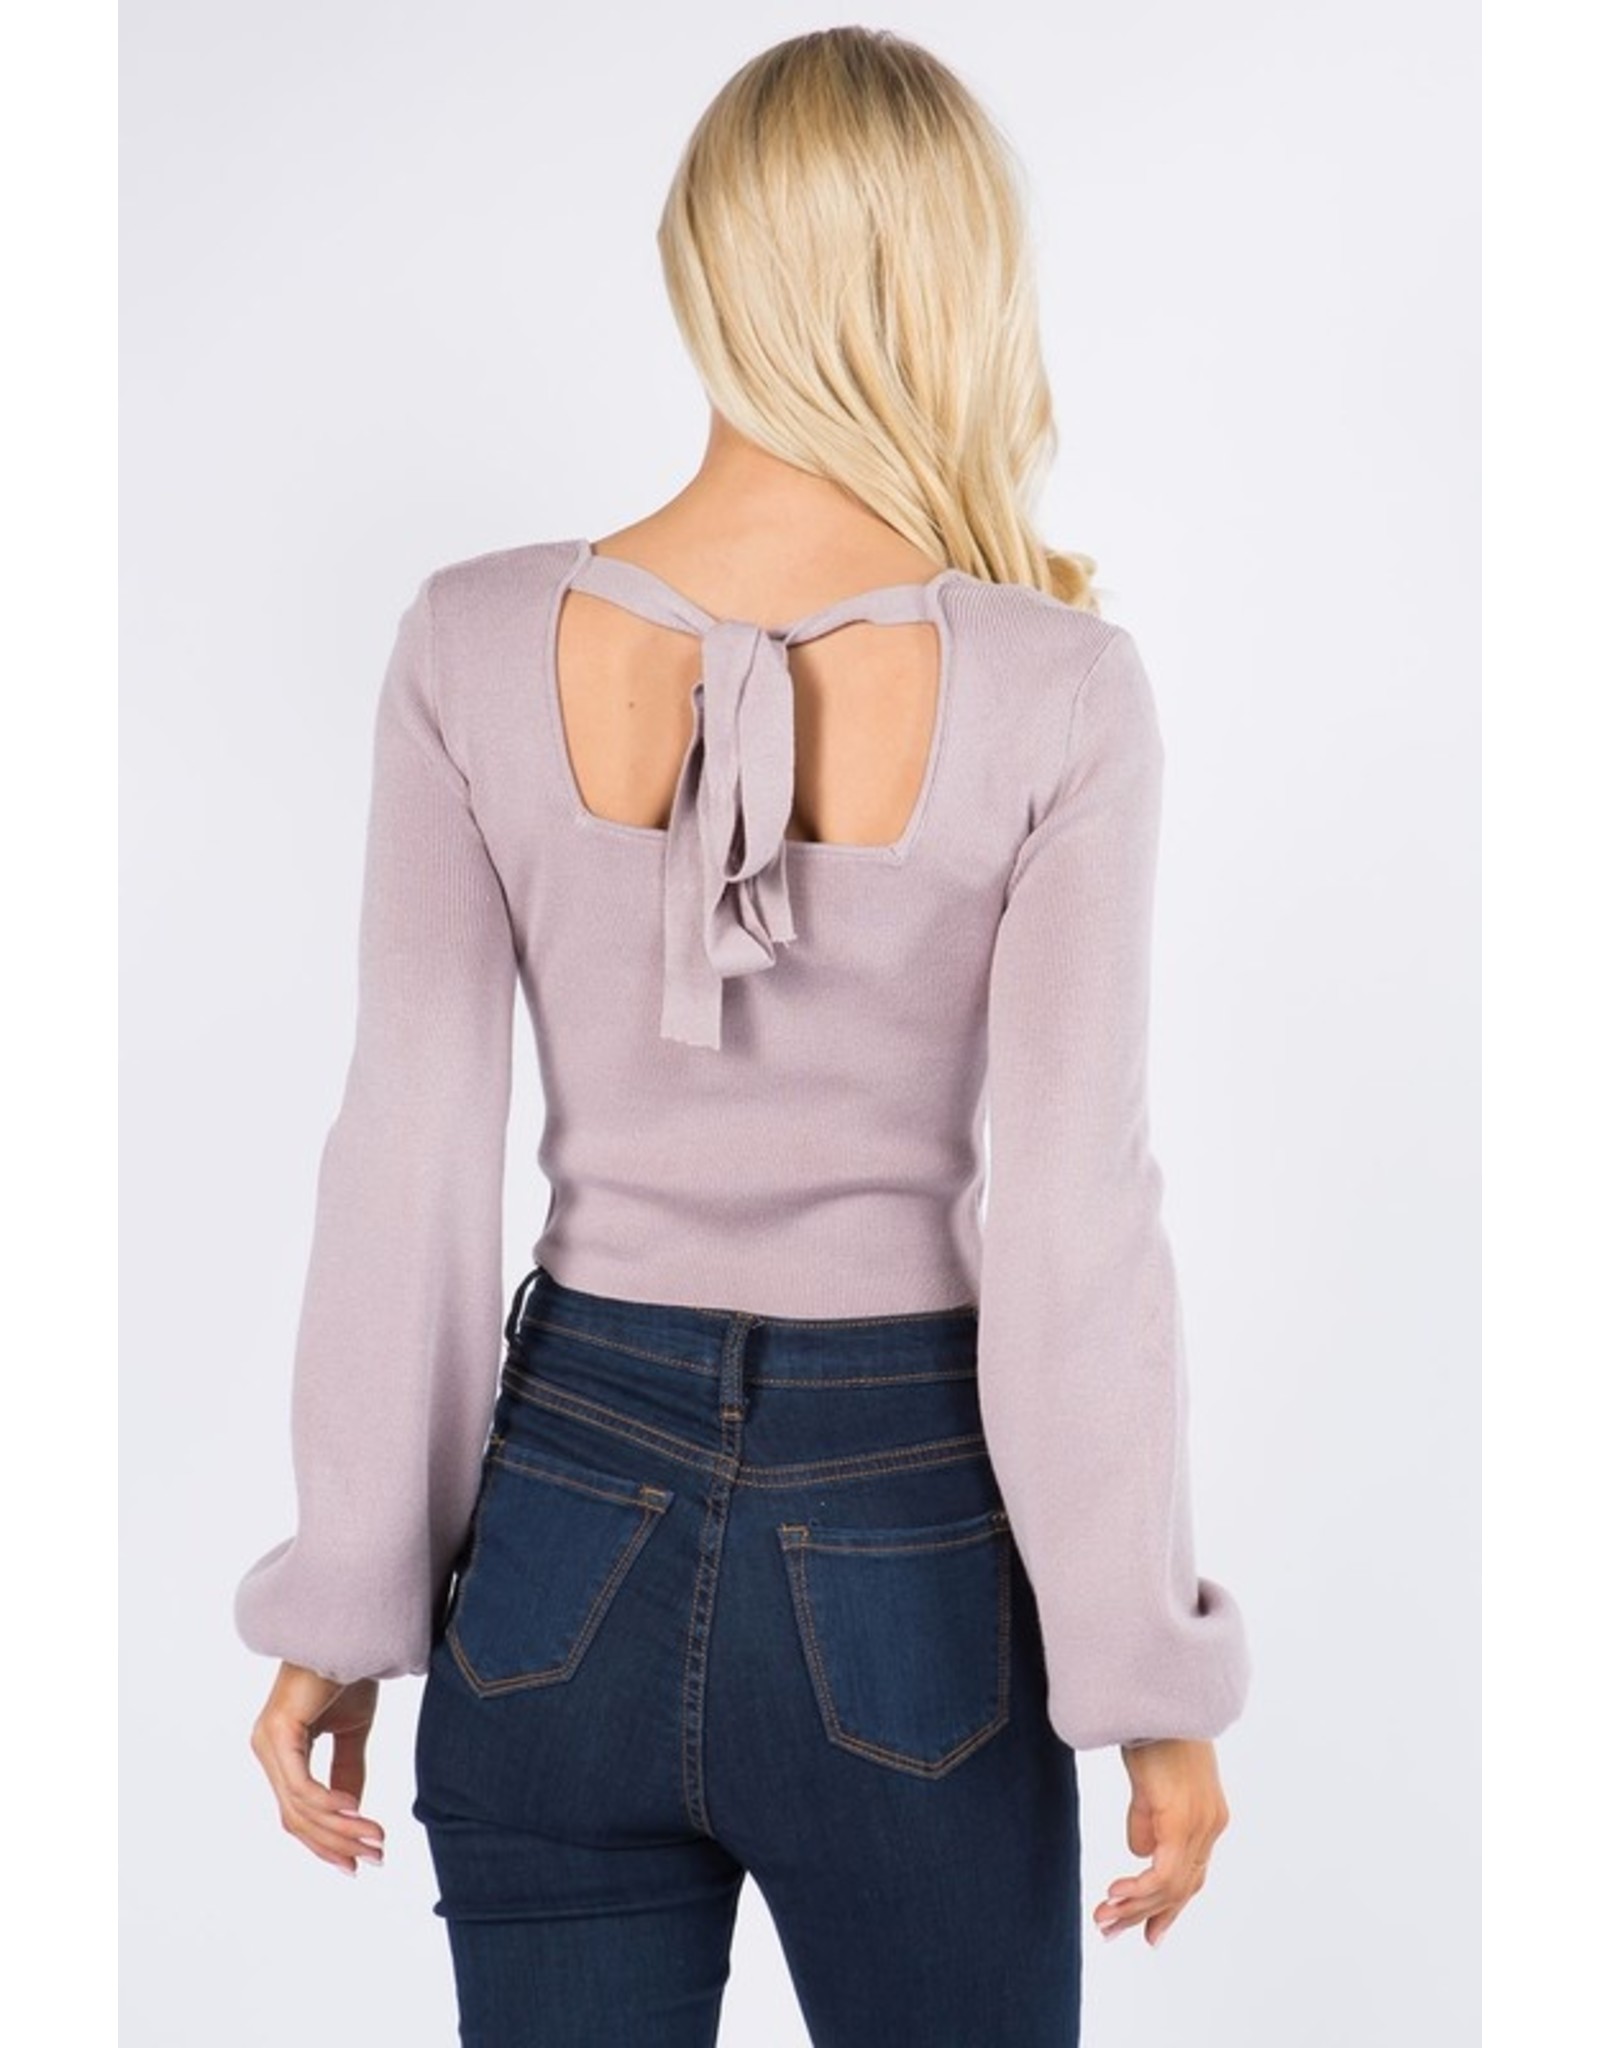 Long Sleeve, Square Neck, Tie Back Top